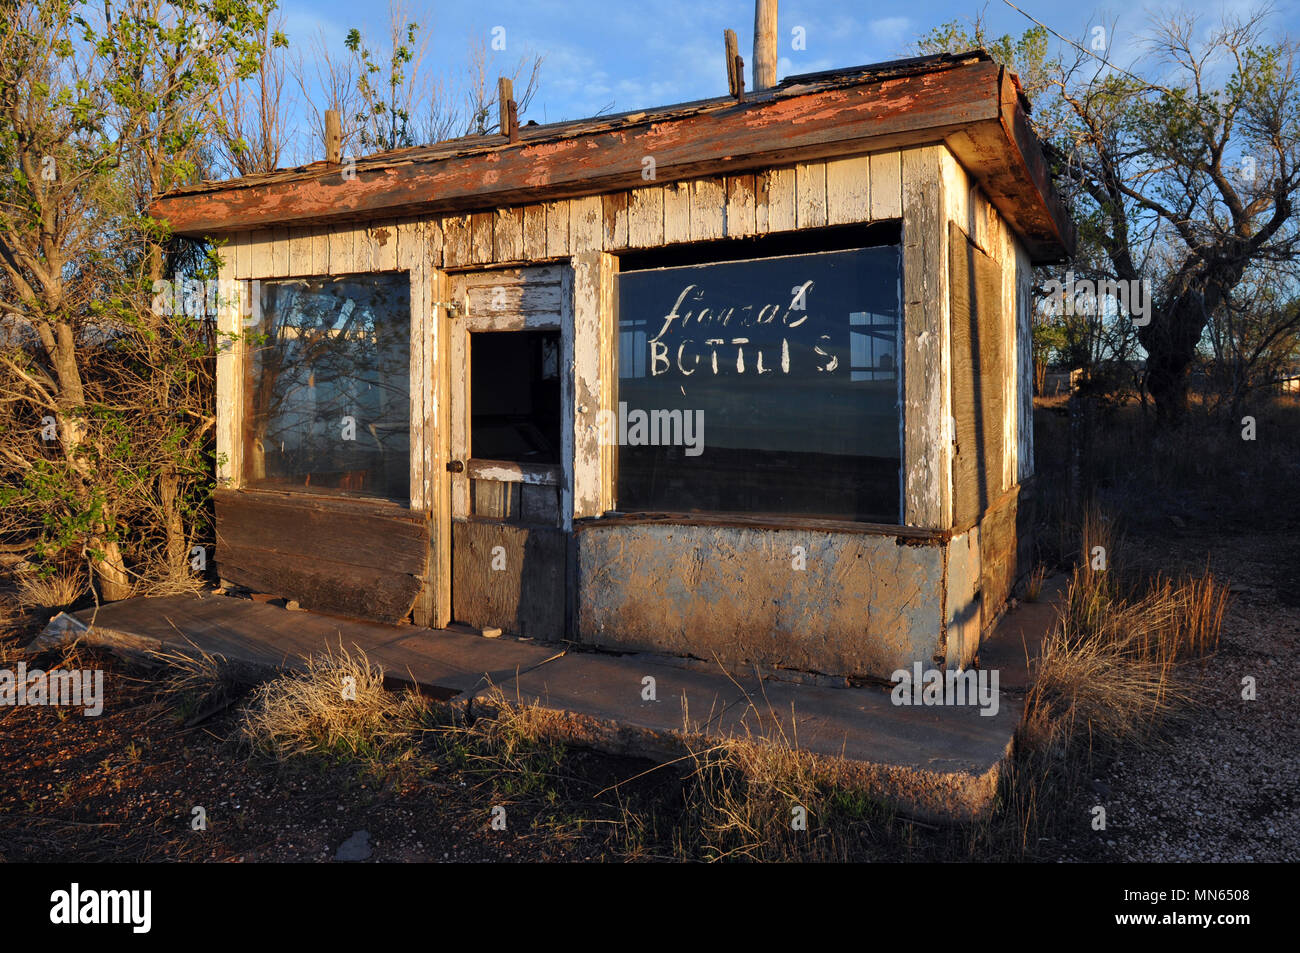 An abandoned shop that once sold figural bottles stands in the Route 66 town of Newkirk, New Mexico. Stock Photo